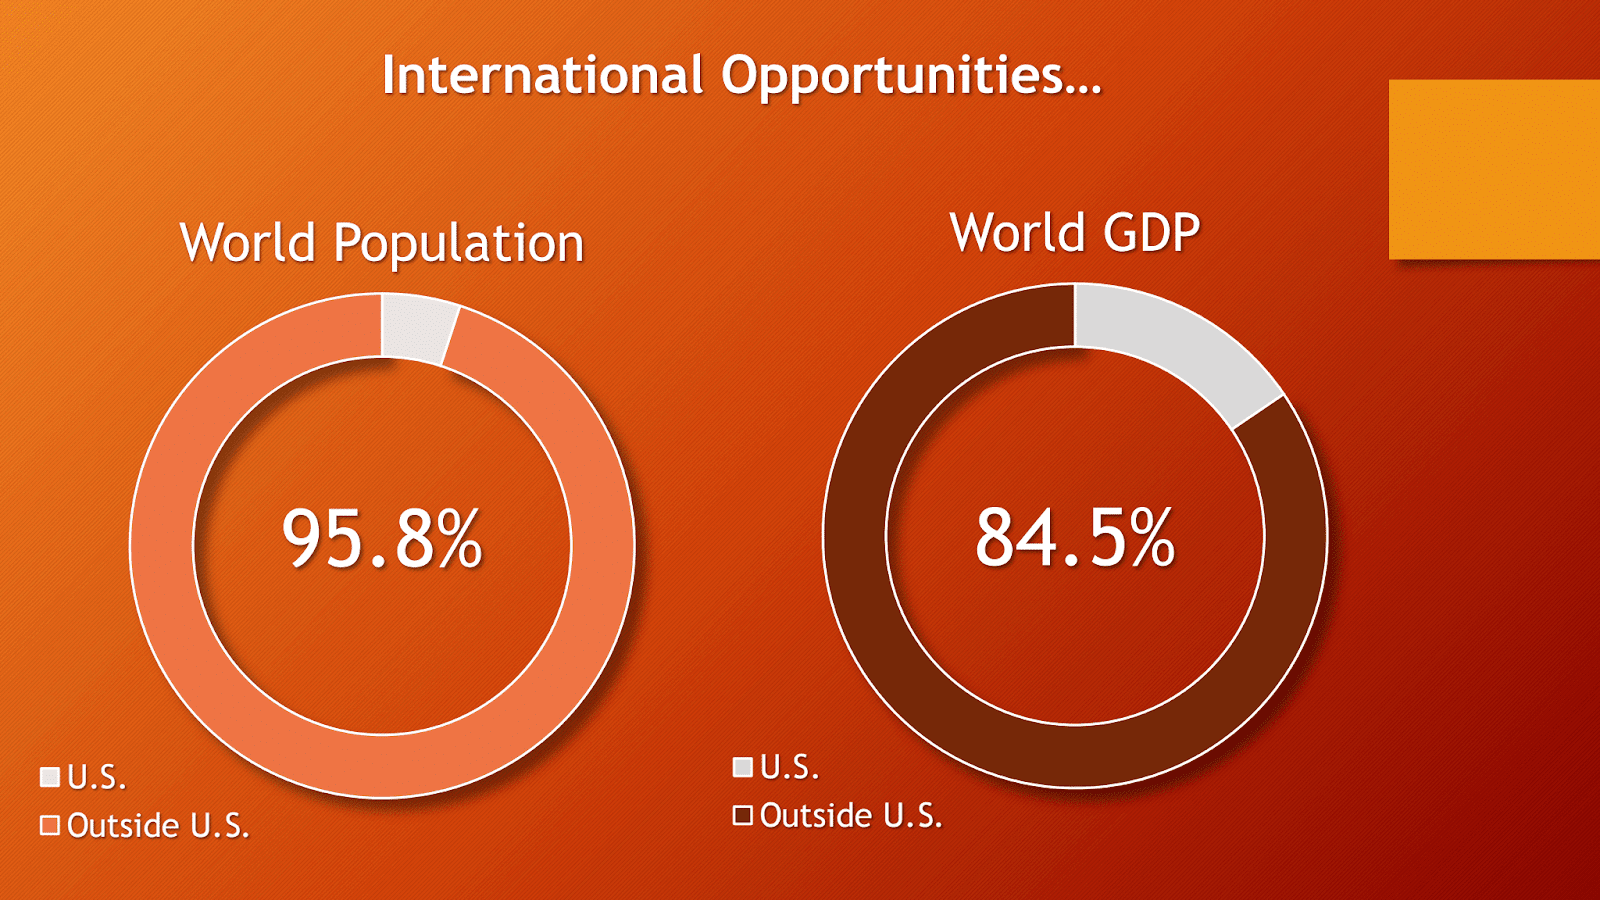 The US accounts for 4.2% of the global population and 15.5% of global GDP.